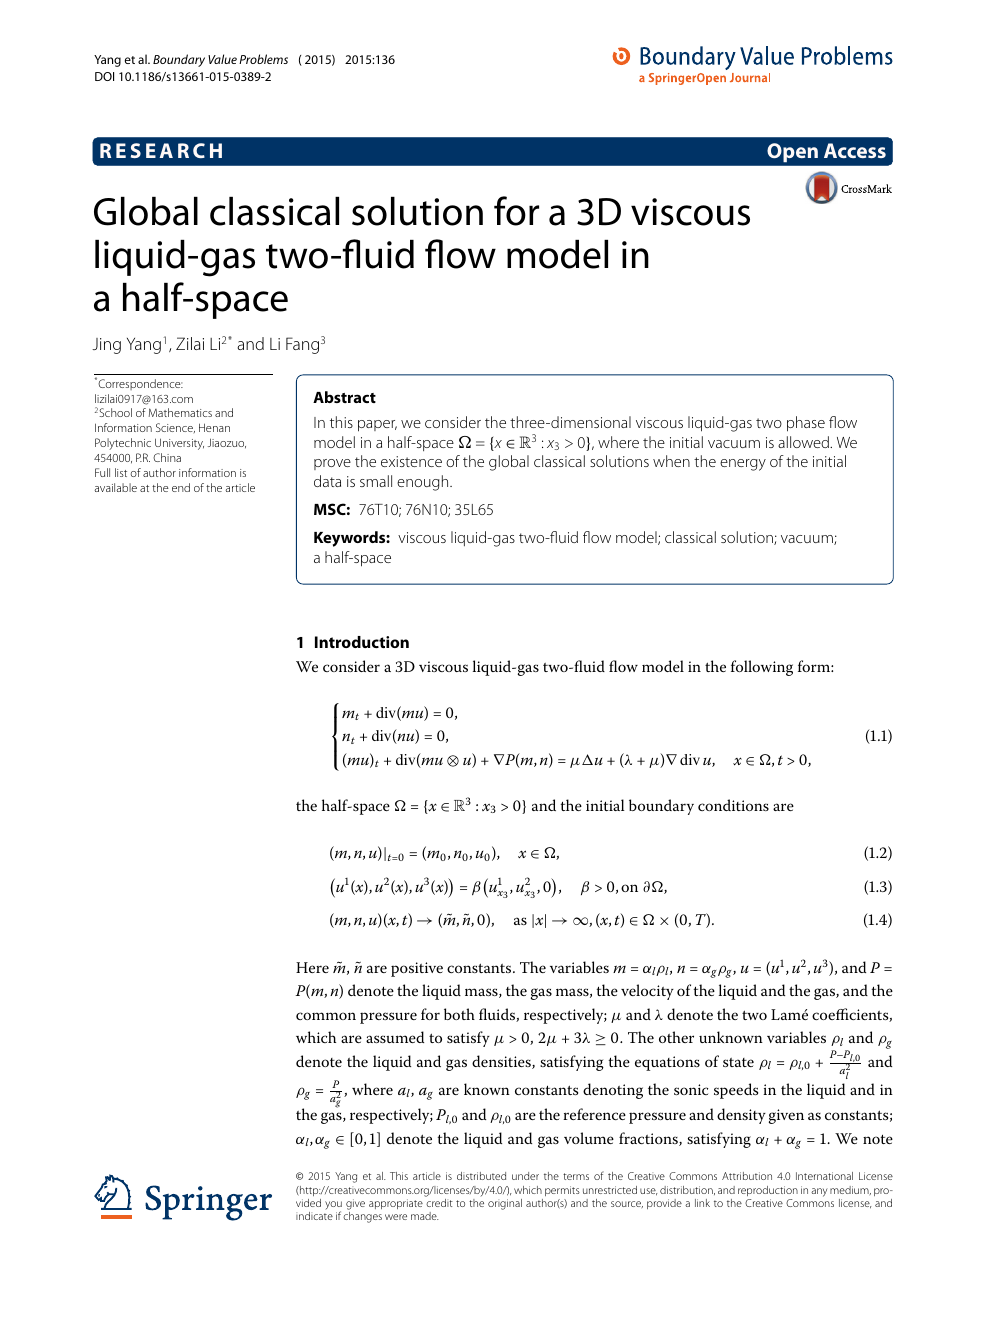 Global Classical Solution For A 3d Viscous Liquid Gas Two Fluid Flow Model In A Half Space Topic Of Research Paper In Mathematics Download Scholarly Article Pdf And Read For Free On Cyberleninka Open